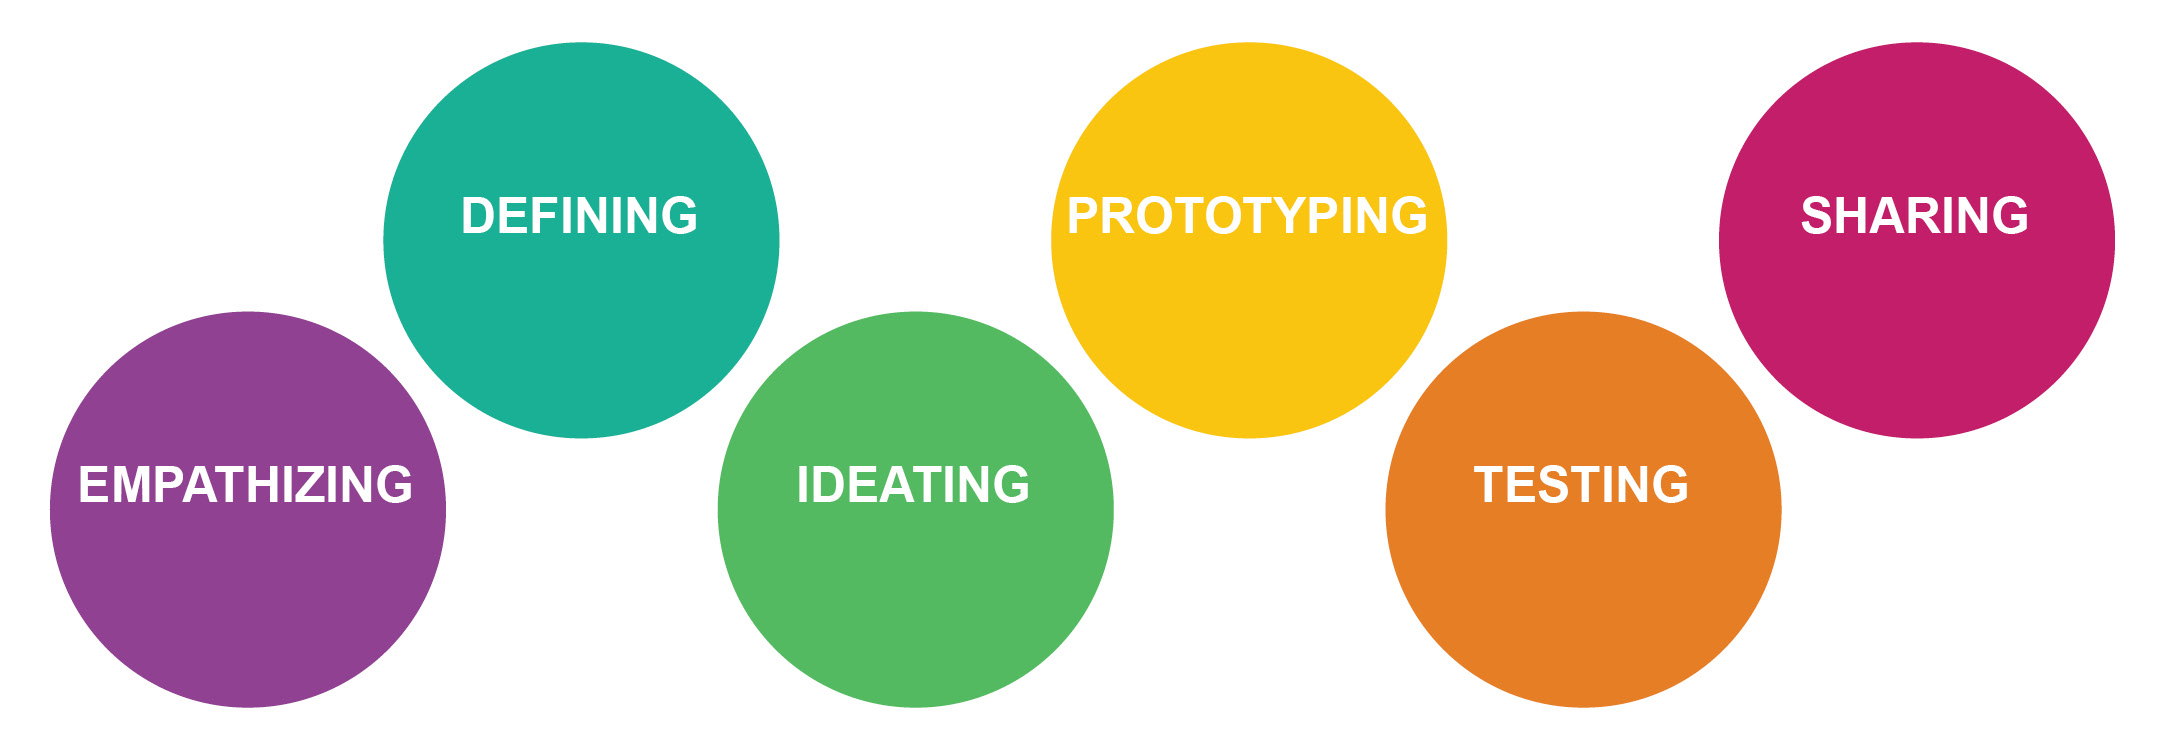 Represents six areas of design as defined by the Stanford School of Design Thinking Process. These include empathizing, defining, ideating, prototyping, testing, and sharing. This graphic is of six circles, from left to right, containing the words: Empathizing, Defining, Ideating, Prototyping, Testing, Sharing.